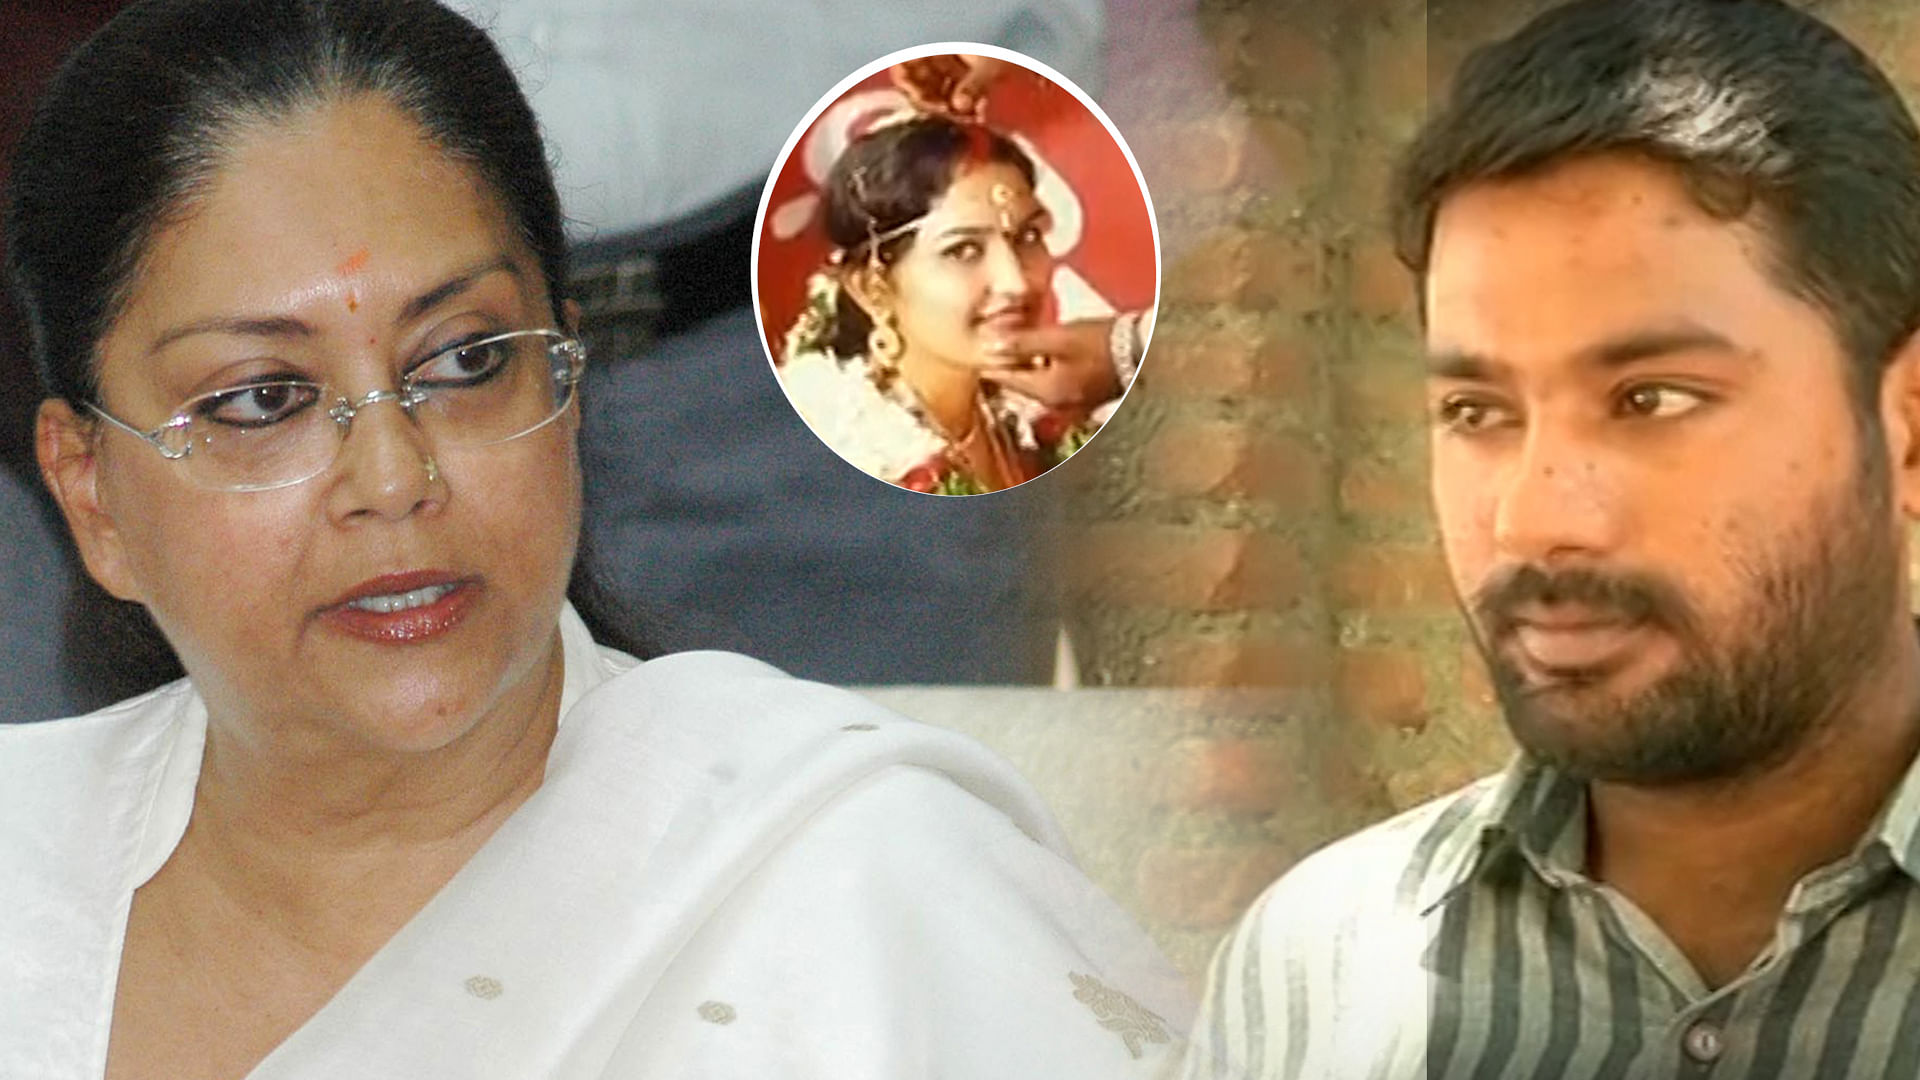 Vinay Babu from Telangana, whose wife Mamata has gone missing for nearly a month now, has appealed to Rajasthan Chief Minister Vasundhara Raje to help track her. (Photo: ANI/altered by <b>The Quint</b>)